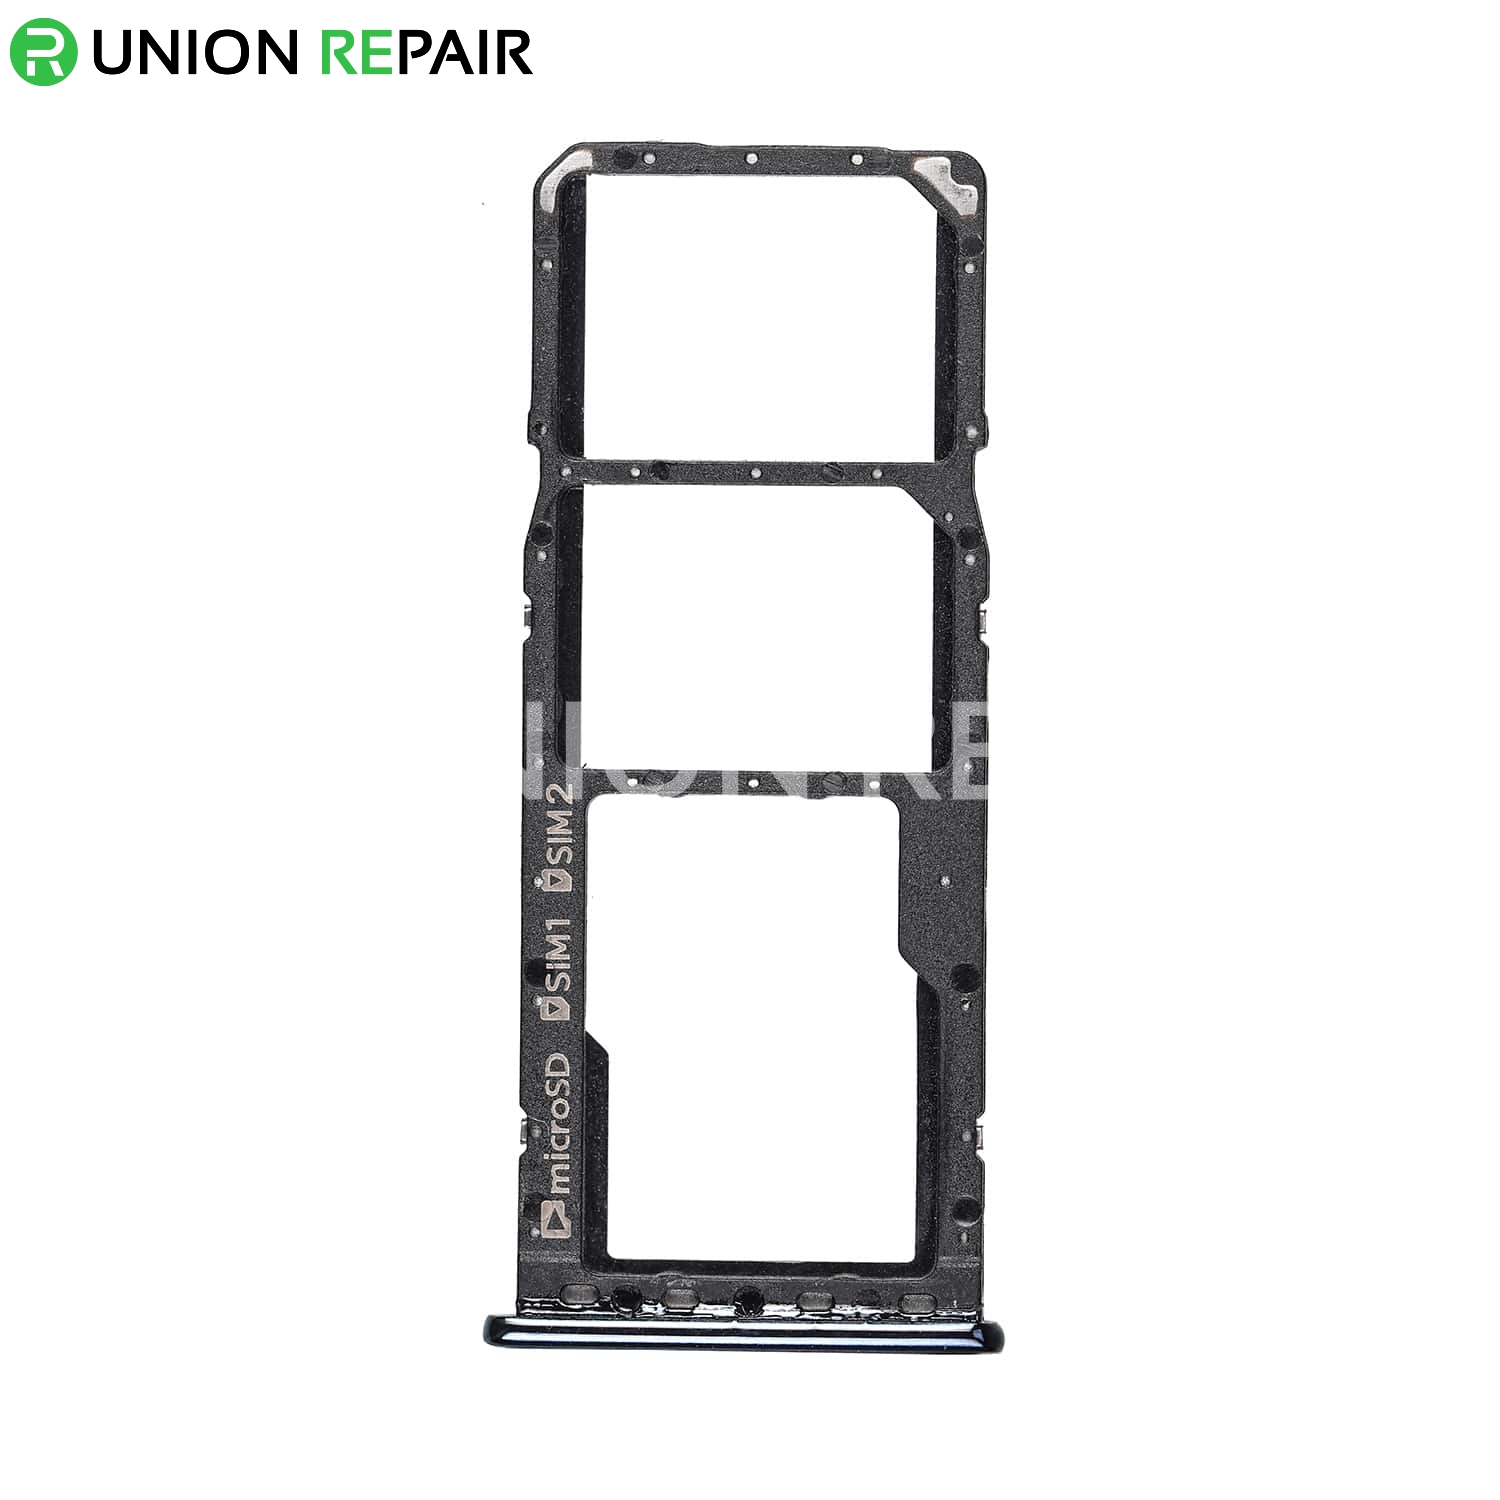 Replacement for Samsung Galaxy A7 (2018) SM-750 SIM Card Tray - Black